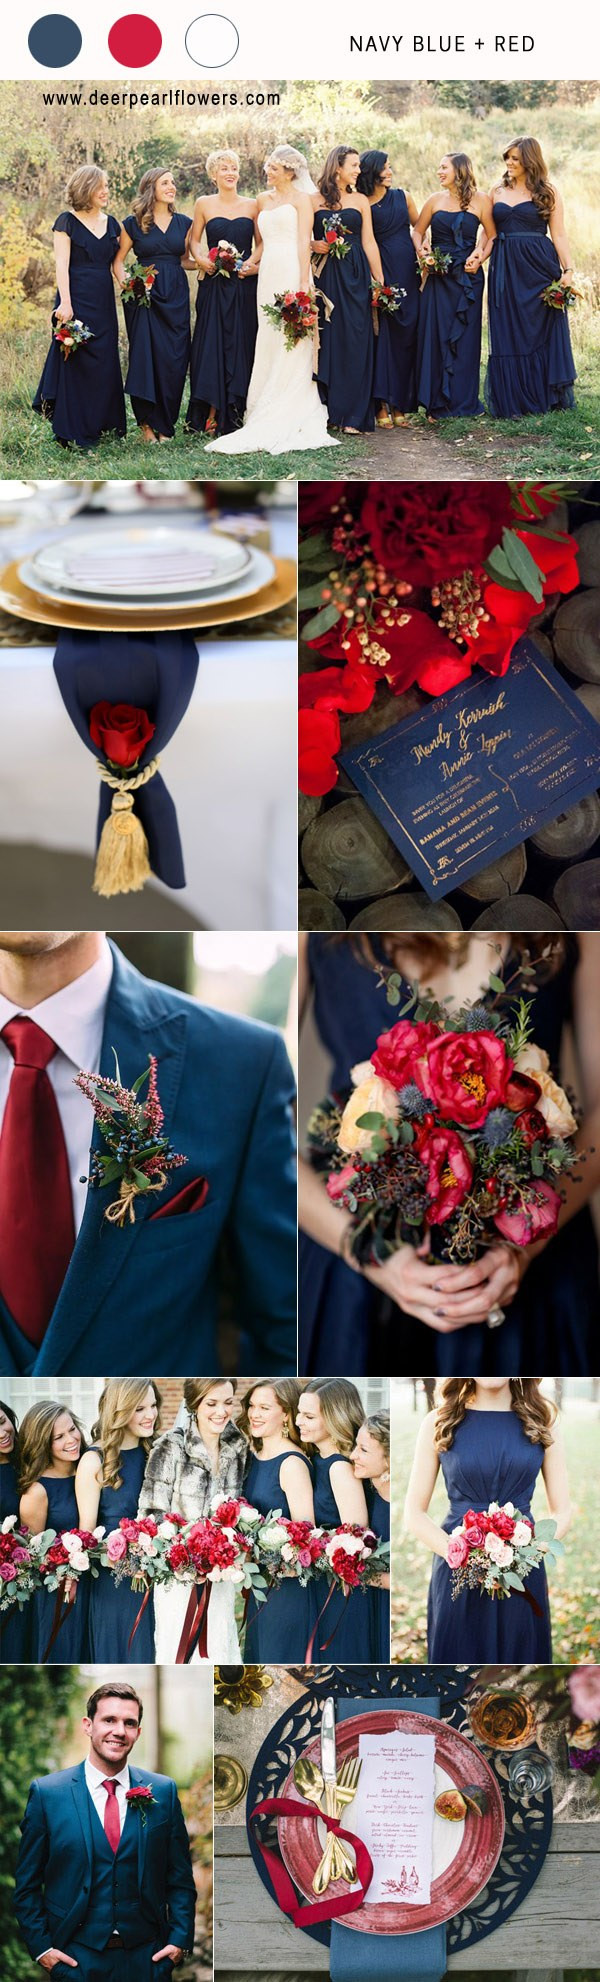 Red And Blue Wedding Colors
 Top 10 Navy Blue Wedding Color bo Ideas for 2018